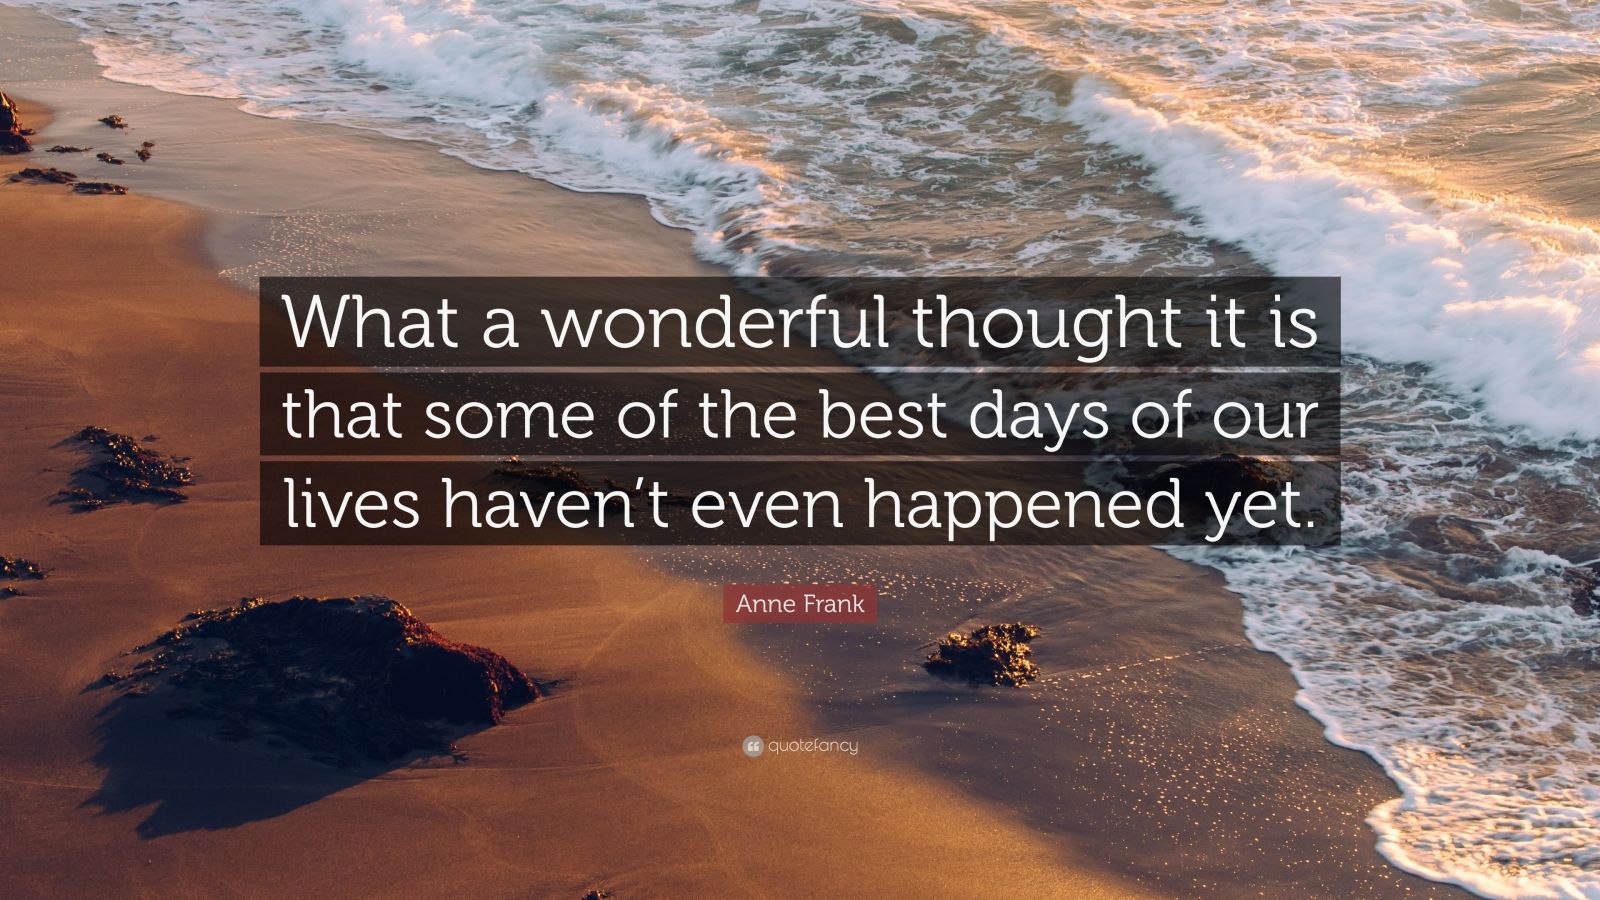 Anne Frank Quote: “What a wonderful thought it is that some of the best